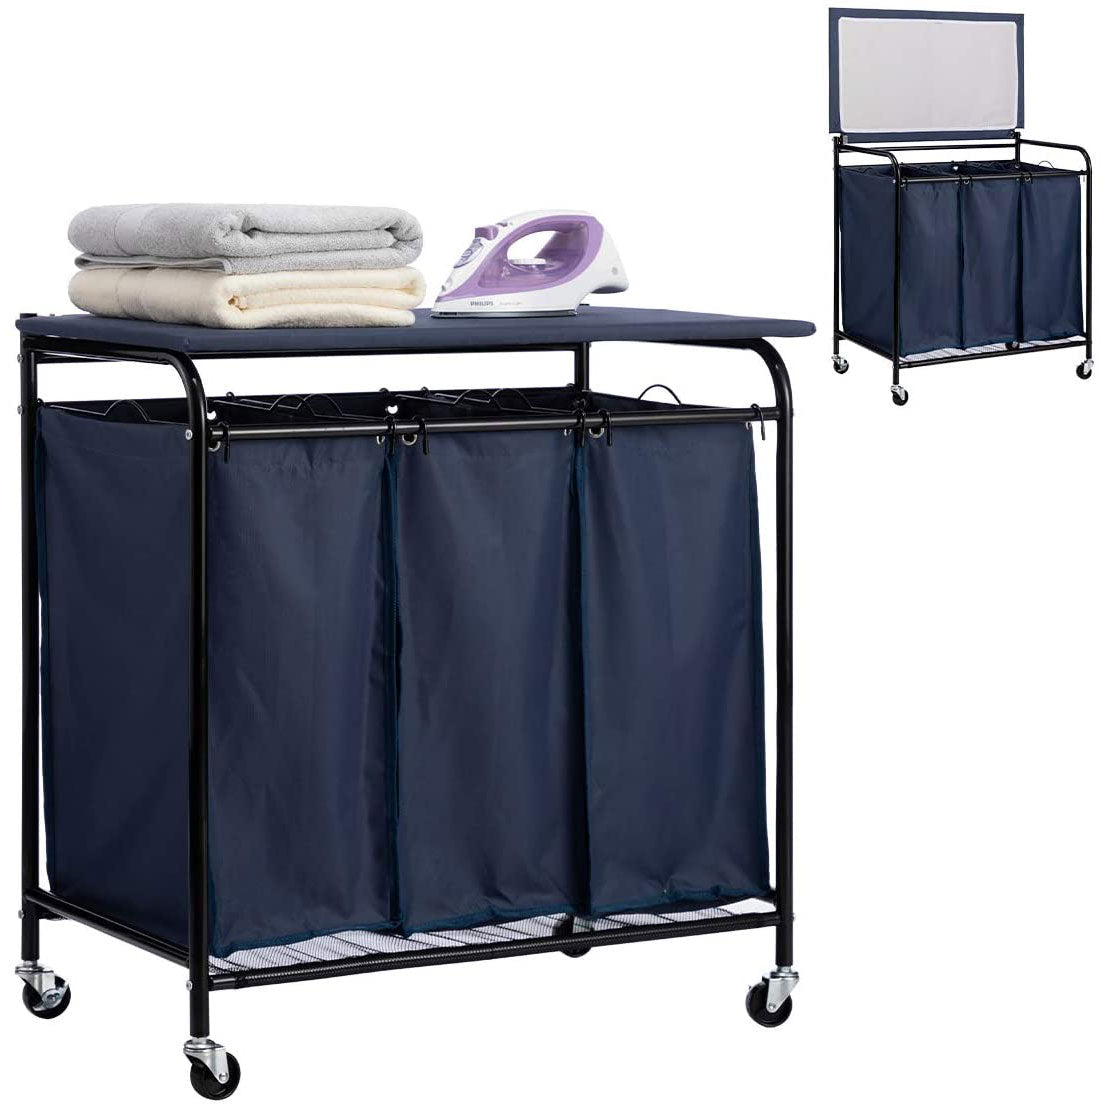 Laundry Sorter Cart 3-Bag Heavy-Duty with Ironing Board